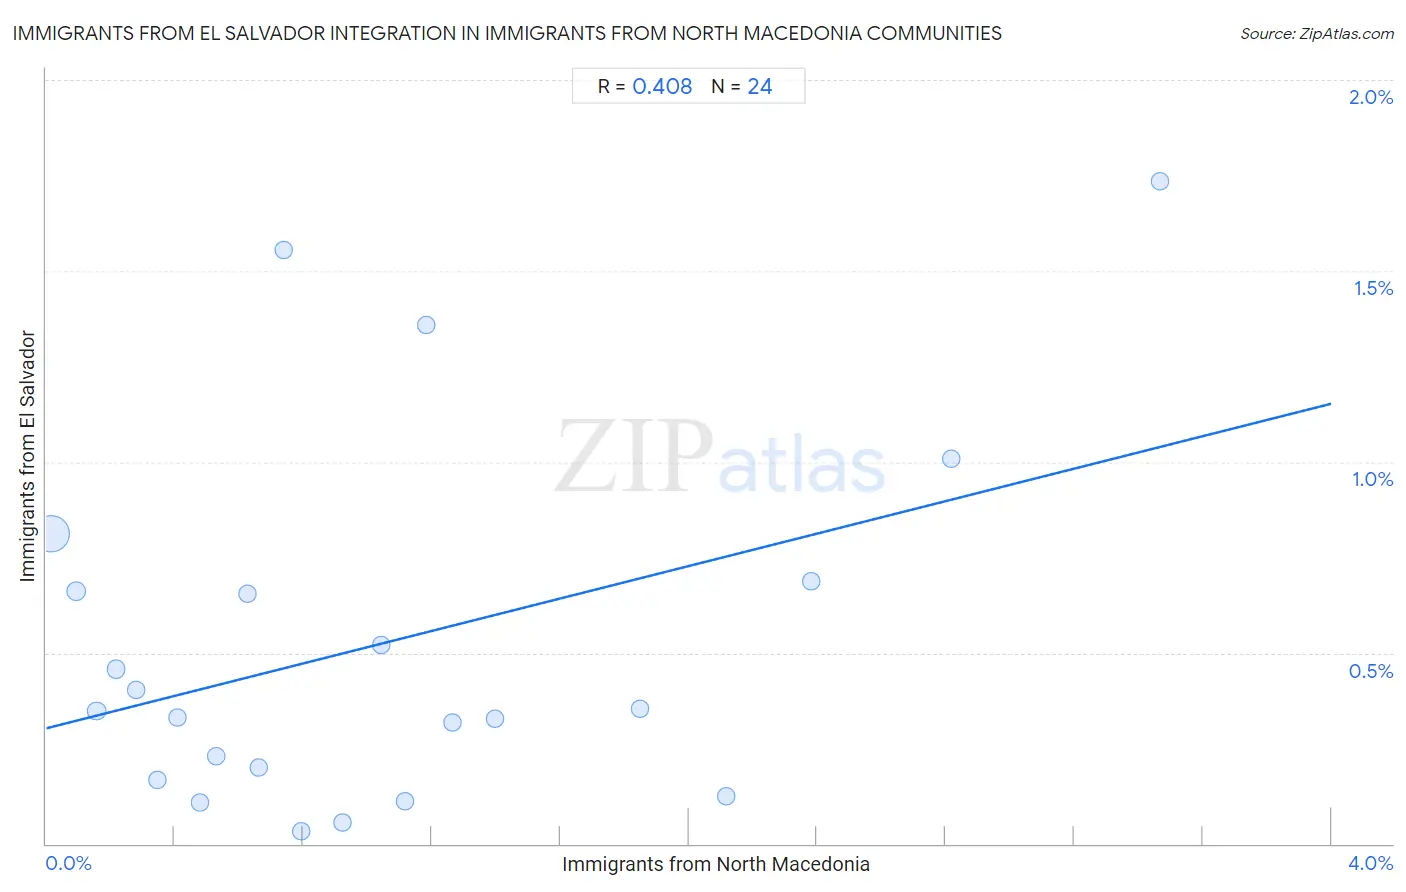 Immigrants from North Macedonia Integration in Immigrants from El Salvador Communities